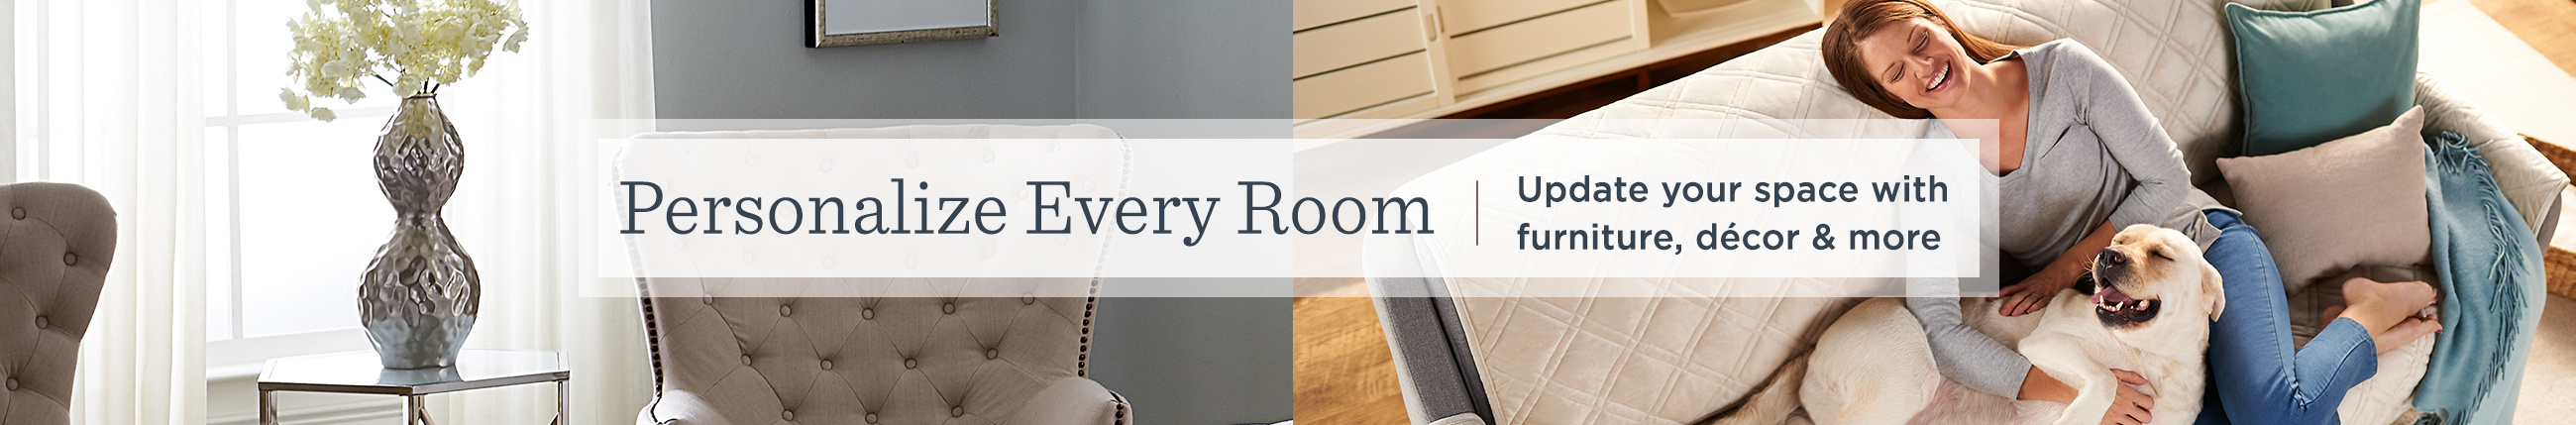 Personalize Every Room. Update your space with furniture, décor & more.